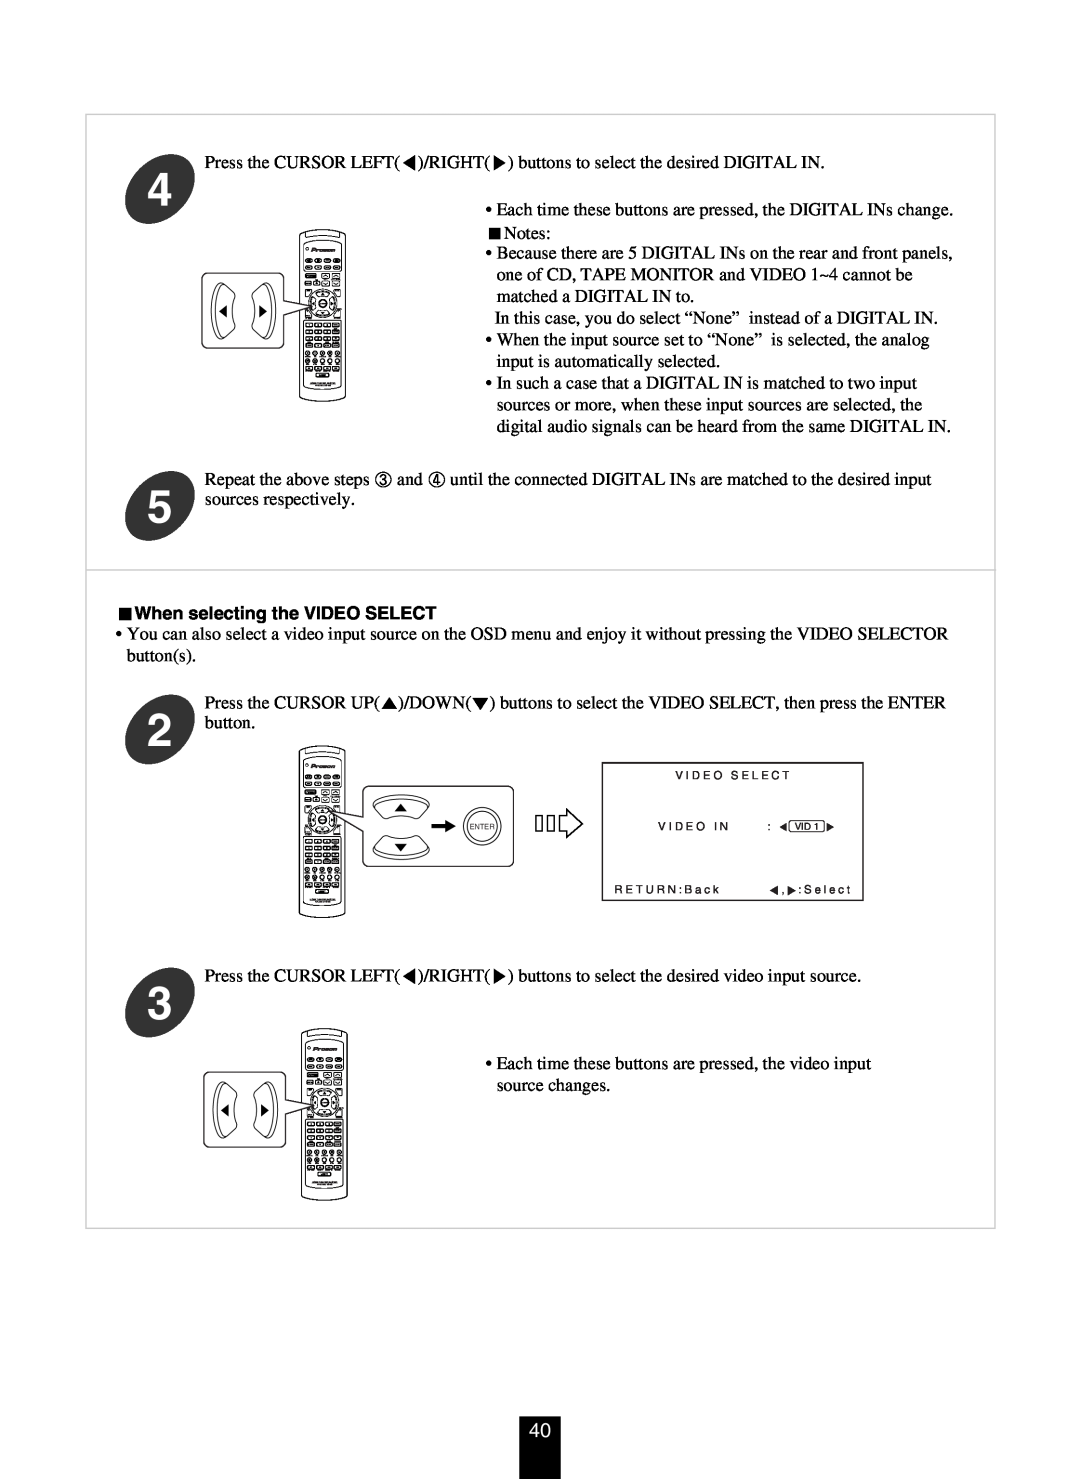 DTS RV4700 DTS-ES manual When selecting the VIDEO SELECT 